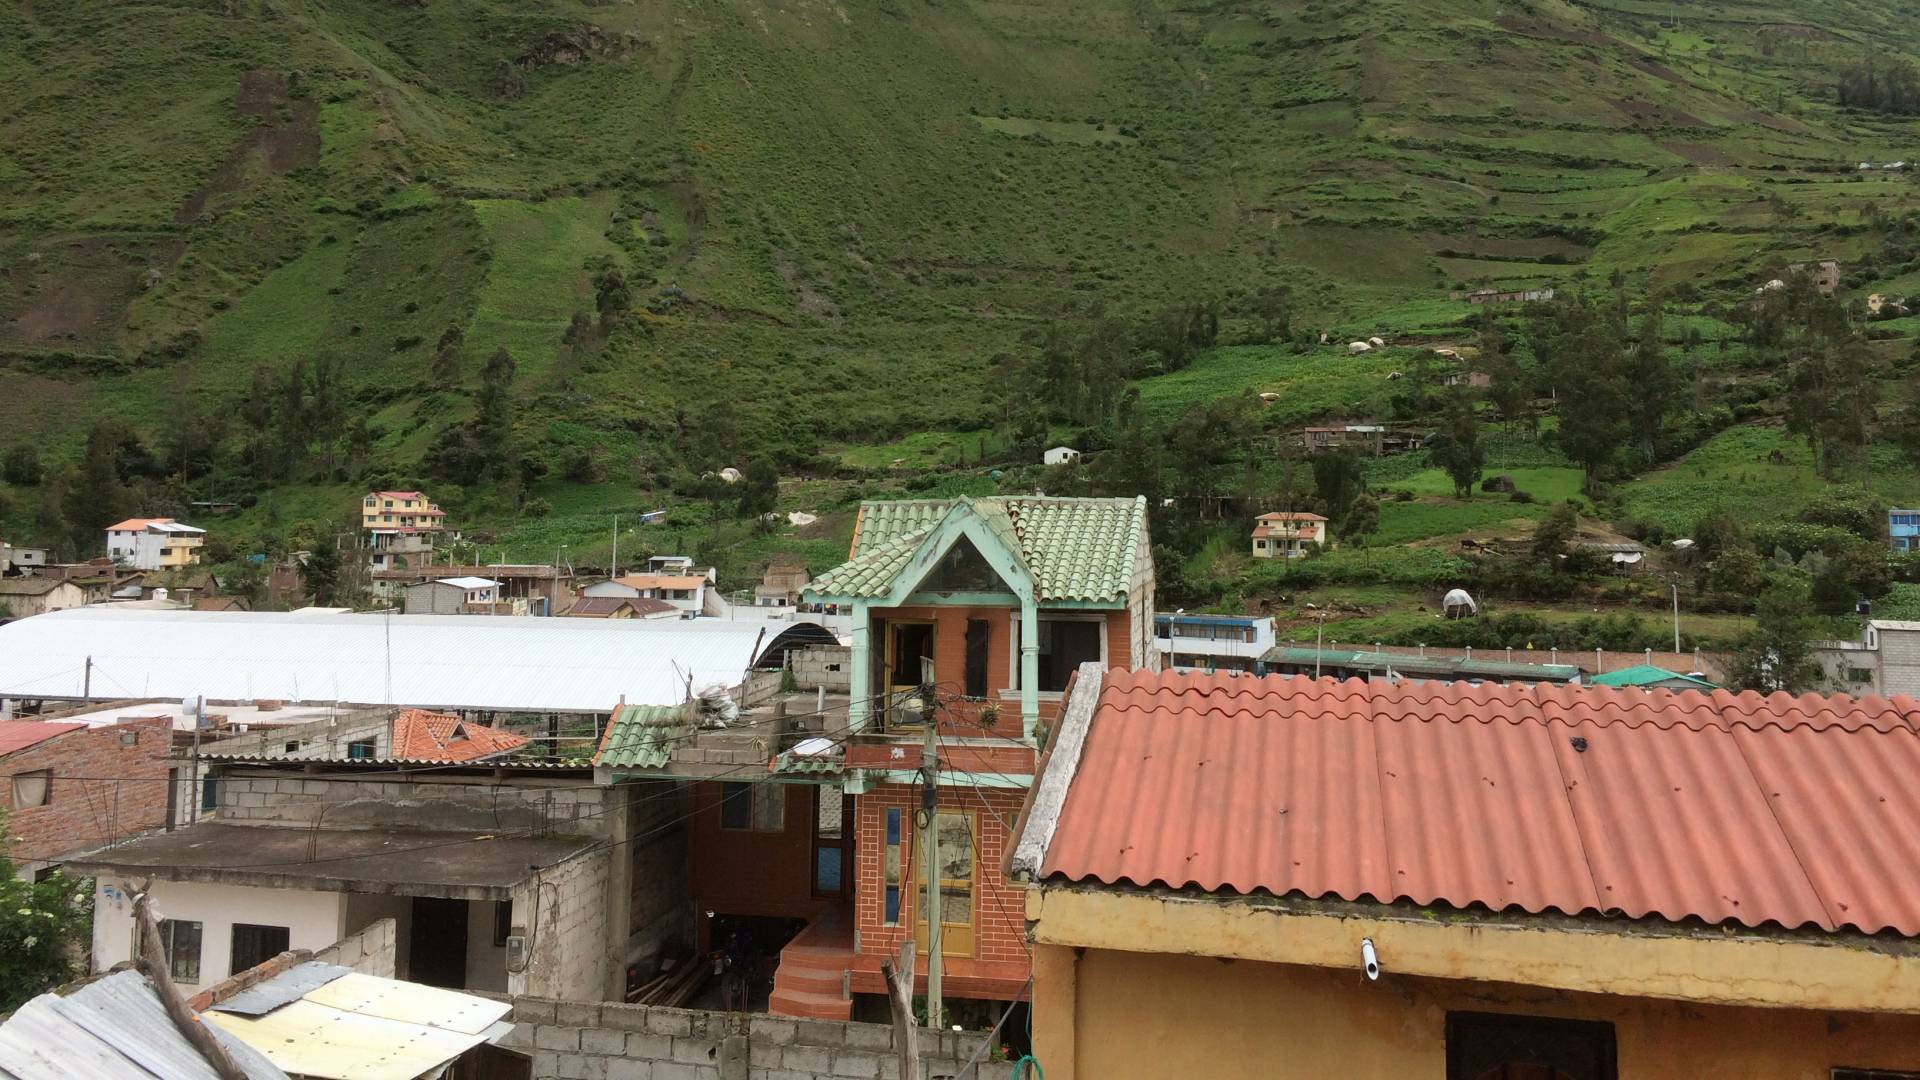 Rooftops and mountain in background in Ecuador